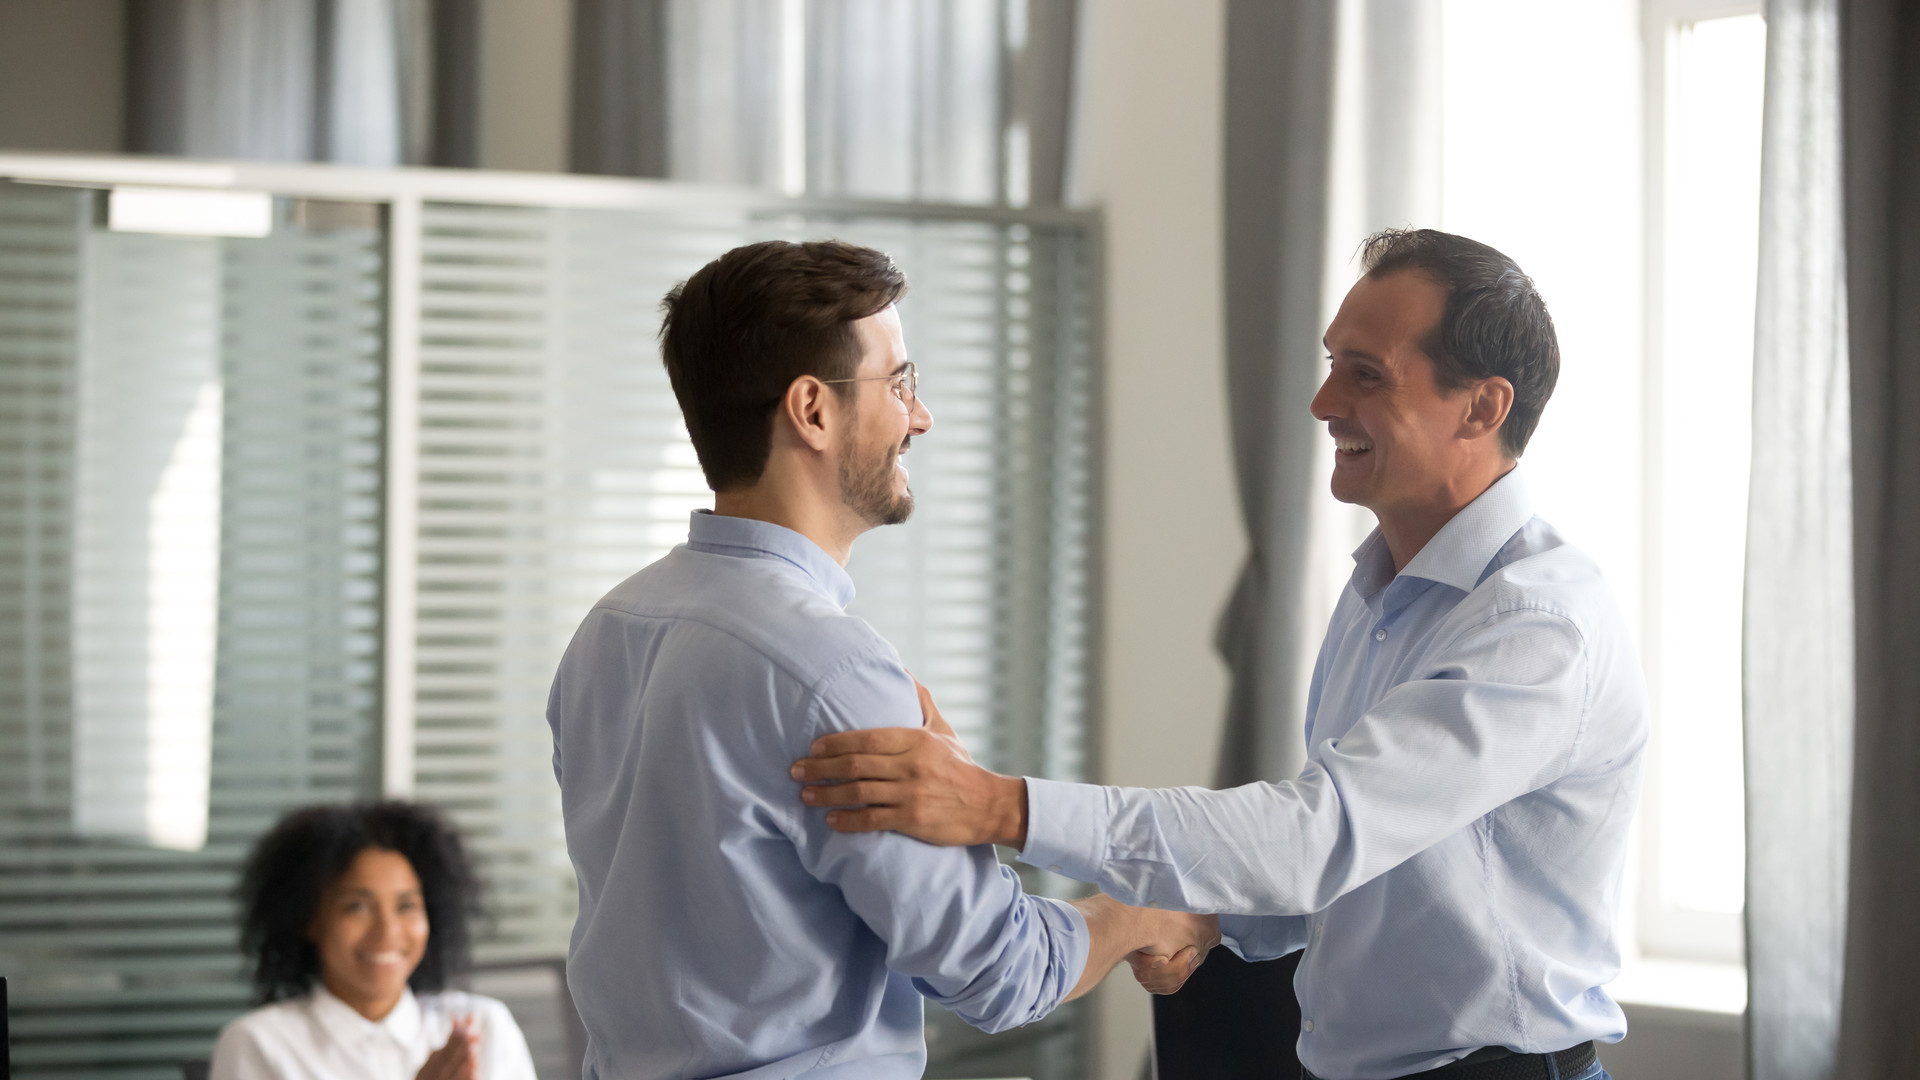 Smiling middle-aged ceo handshaking successful male worker showing respect